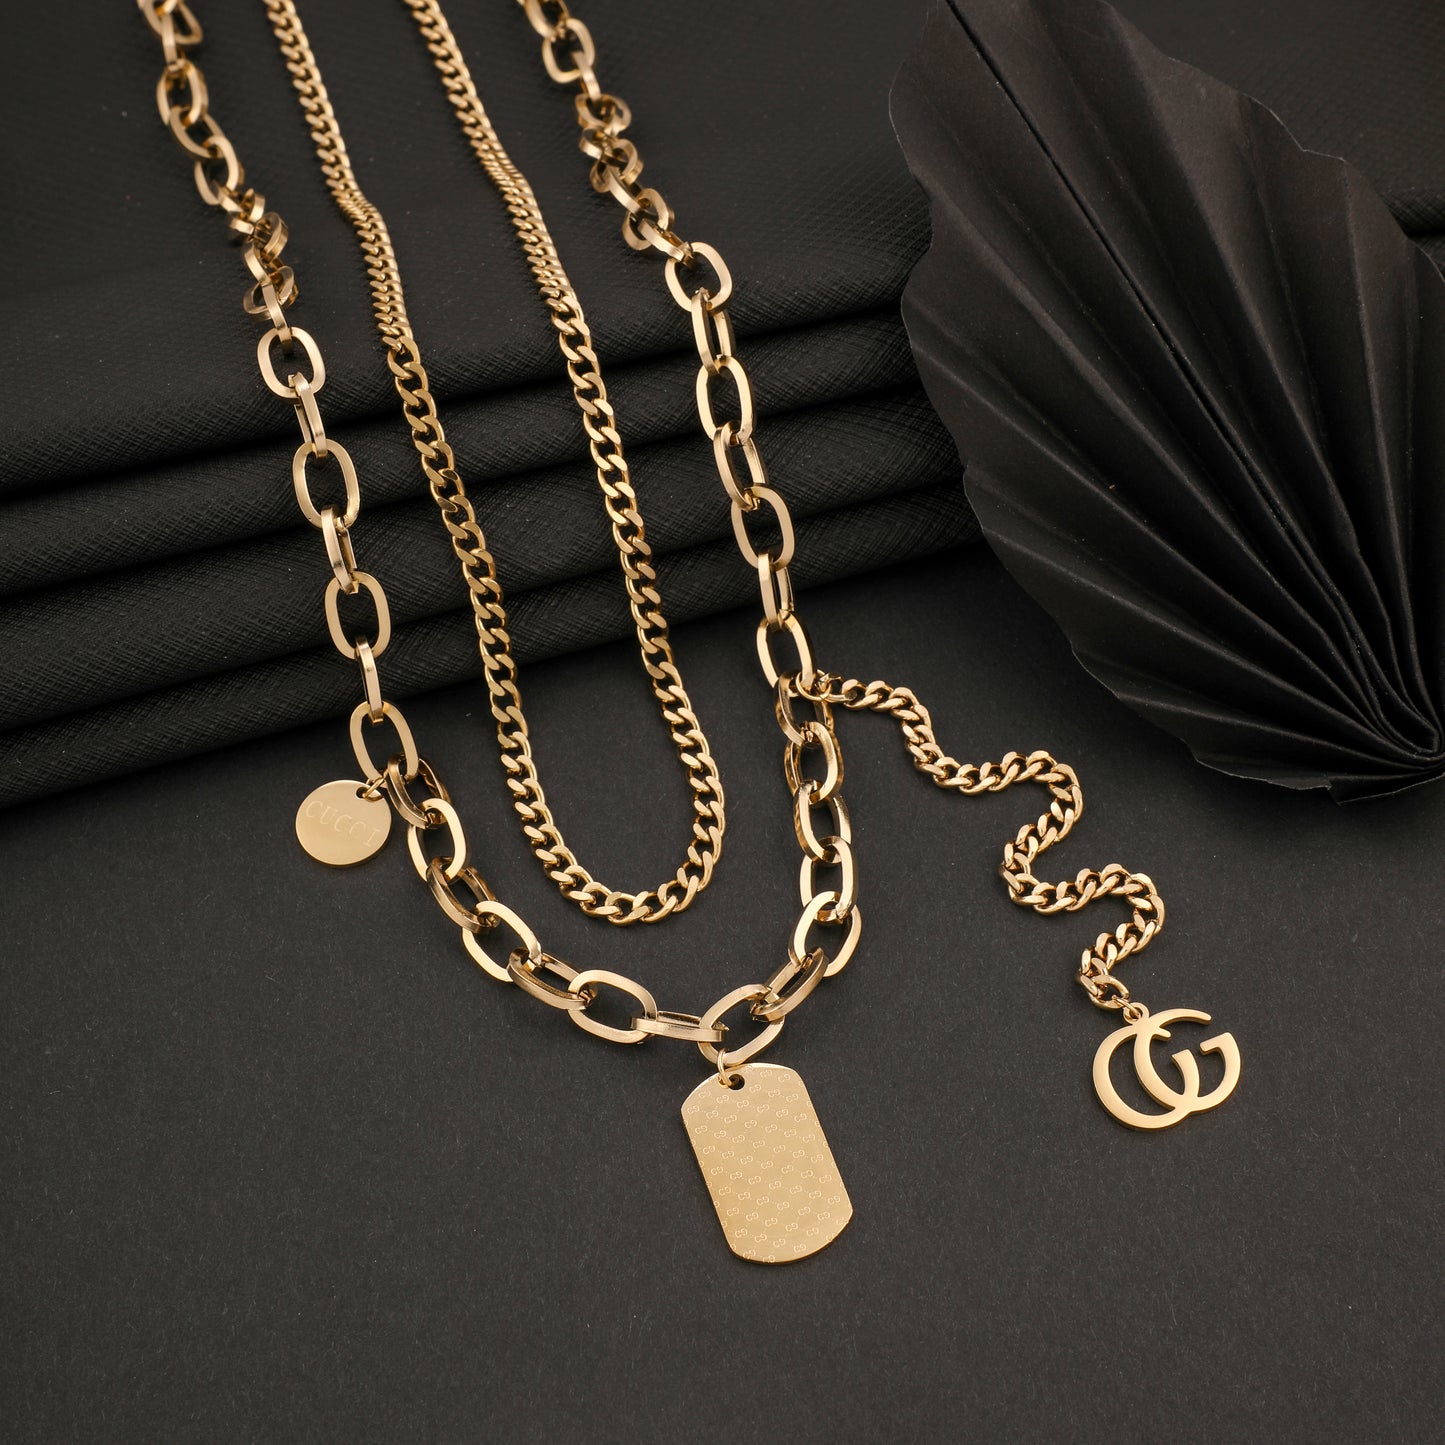 HEXAGONE GOLD PEDANT NECKLACE